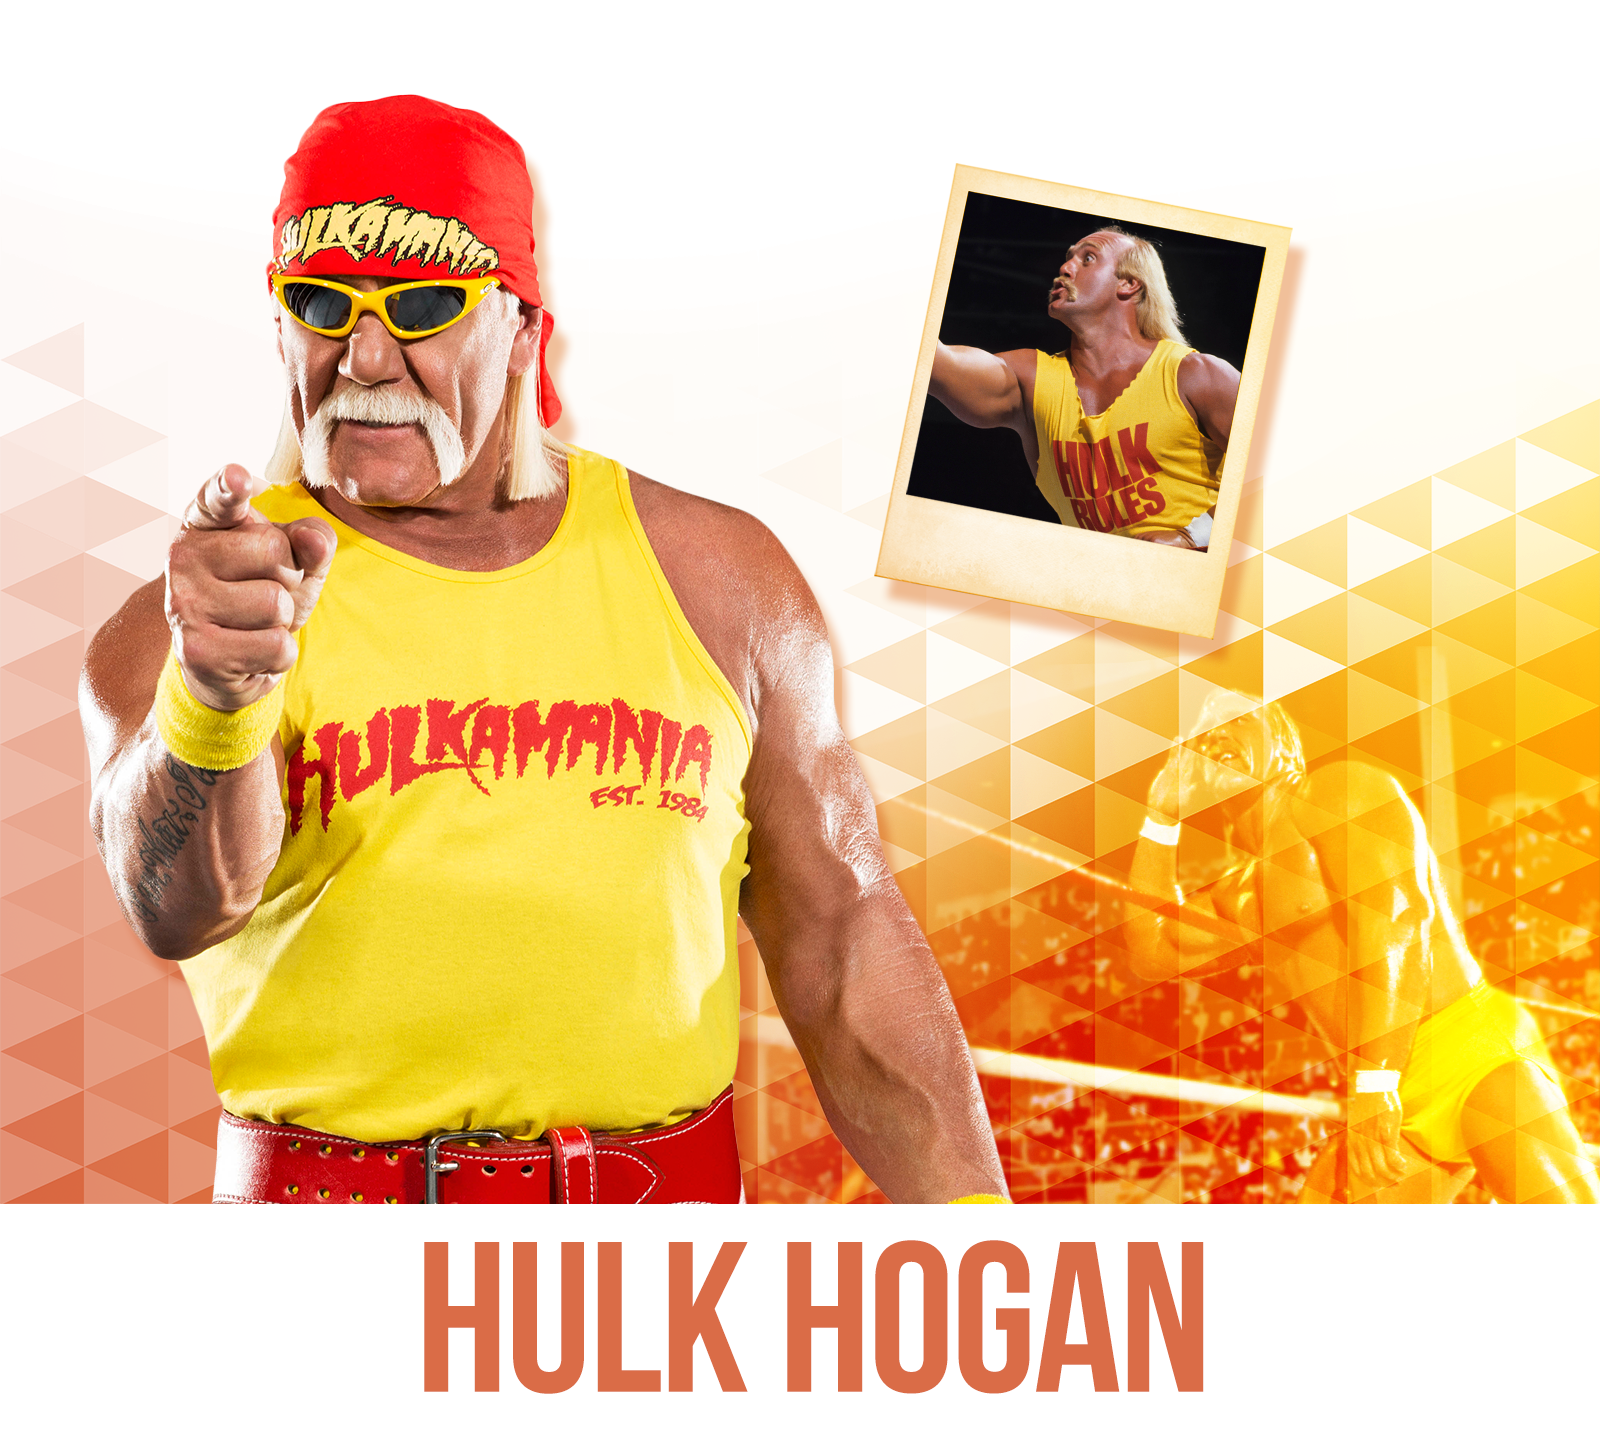 Tell Me About Yourself(ie): Hulk Hogan